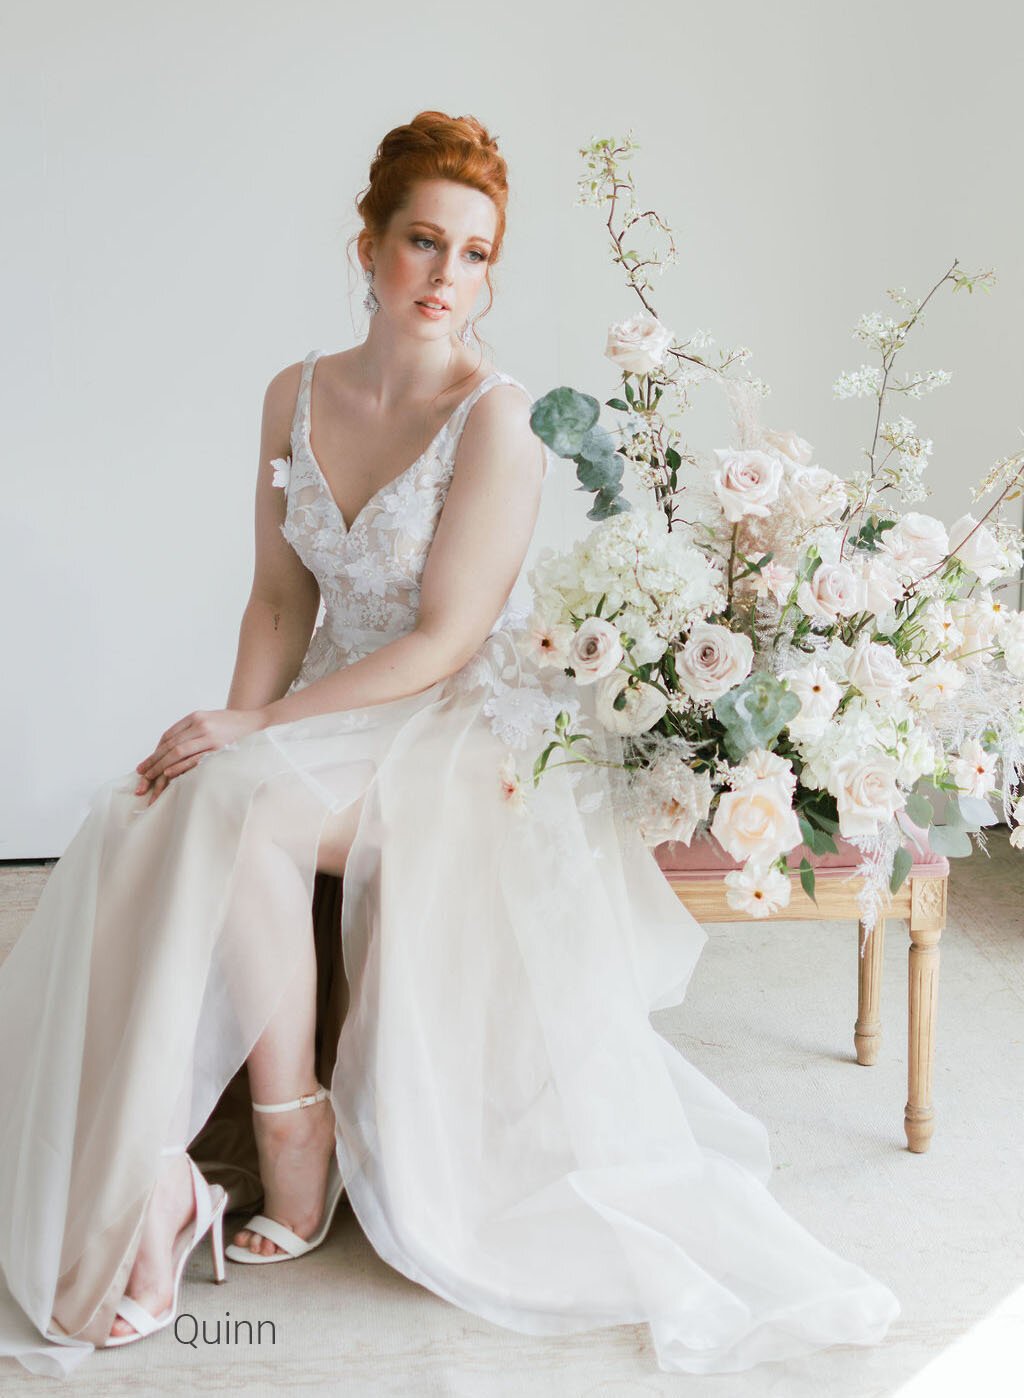 ivory-and-beau-dresses-trunk-show-kathryn-bass-sample-sale-coming-soon-quinn5.jpg